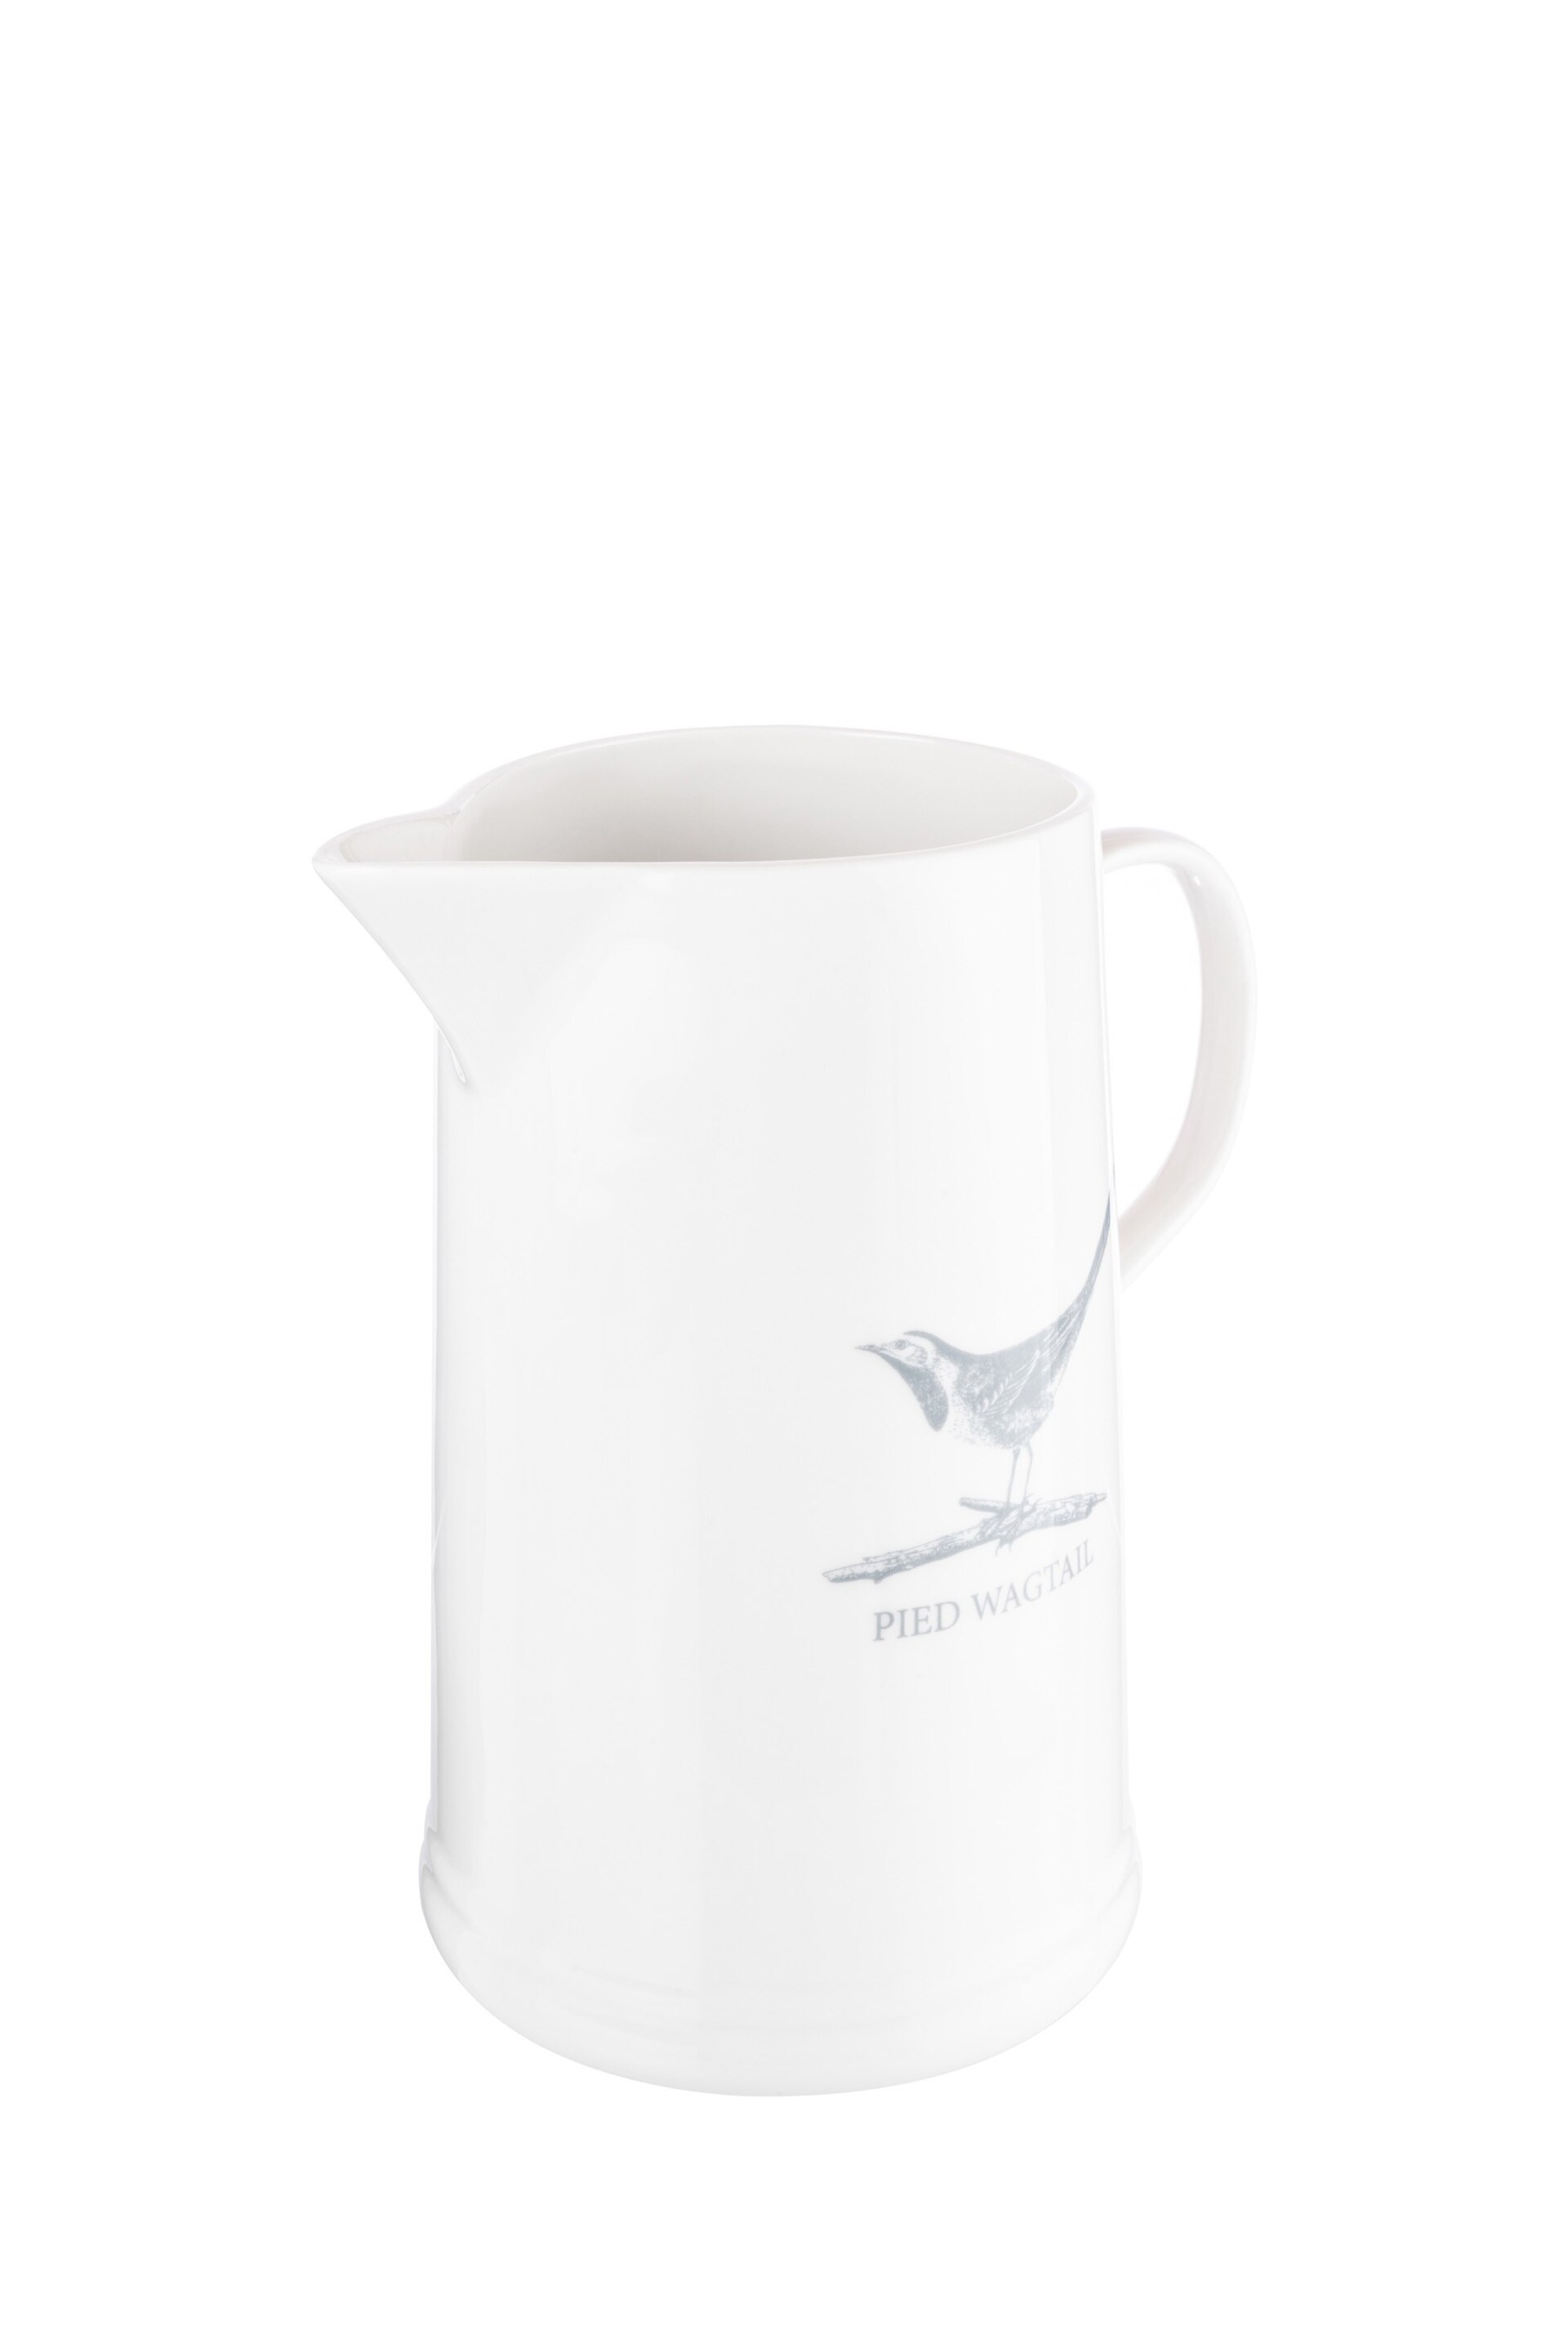 Mary Berry White Garden Pied Wagtail Large Jug - Image 3 of 4